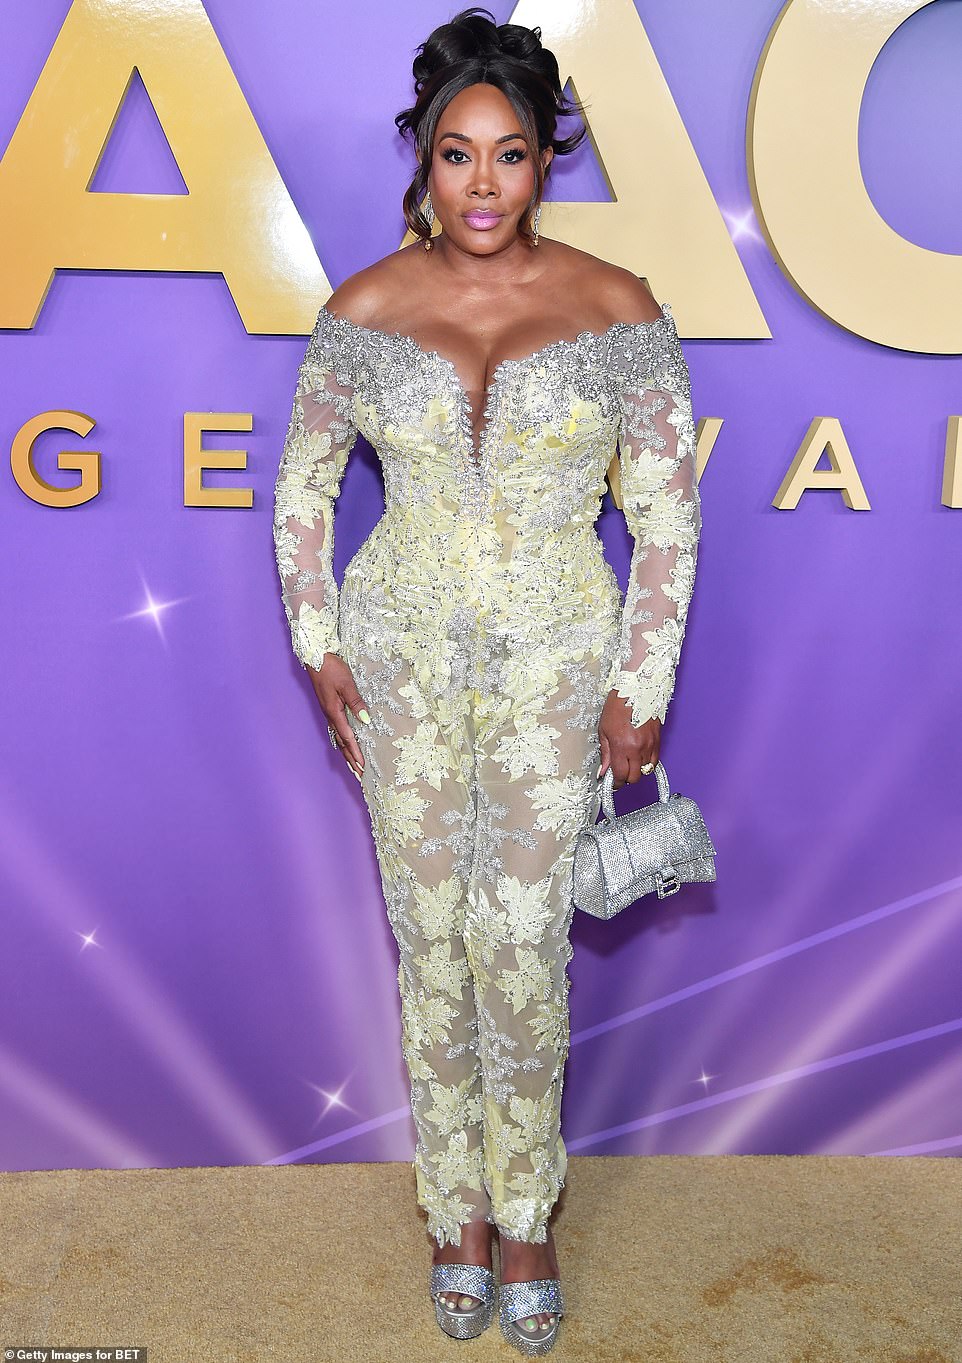 Timelessly bubbly at the age of 59, Vivica A. Fox strutted around in a tantalizing sheer floral jumpsuit that clung to her curves and flaunted her bountiful endowments